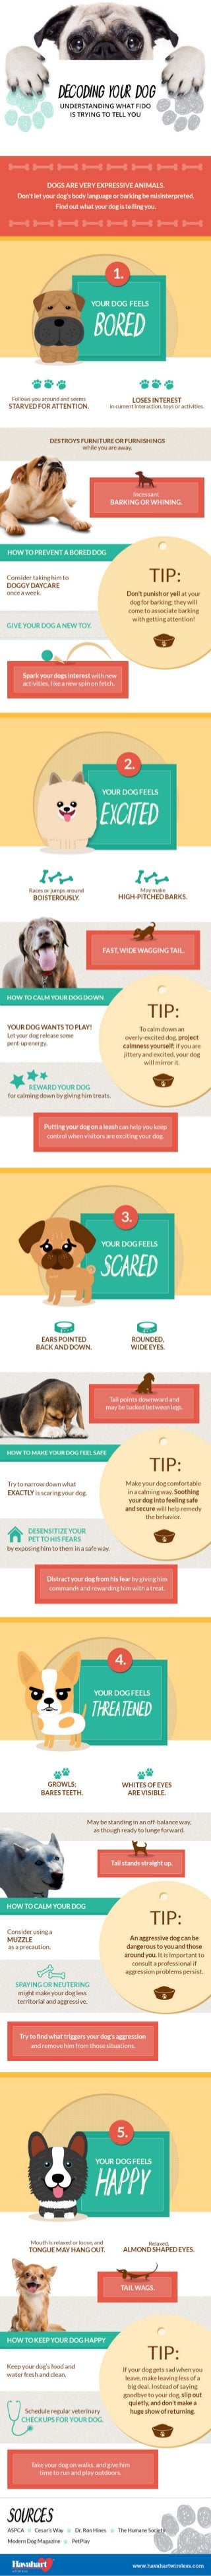 decoding-your-dog-what-fido-is-trying-to-tell-you-infographic